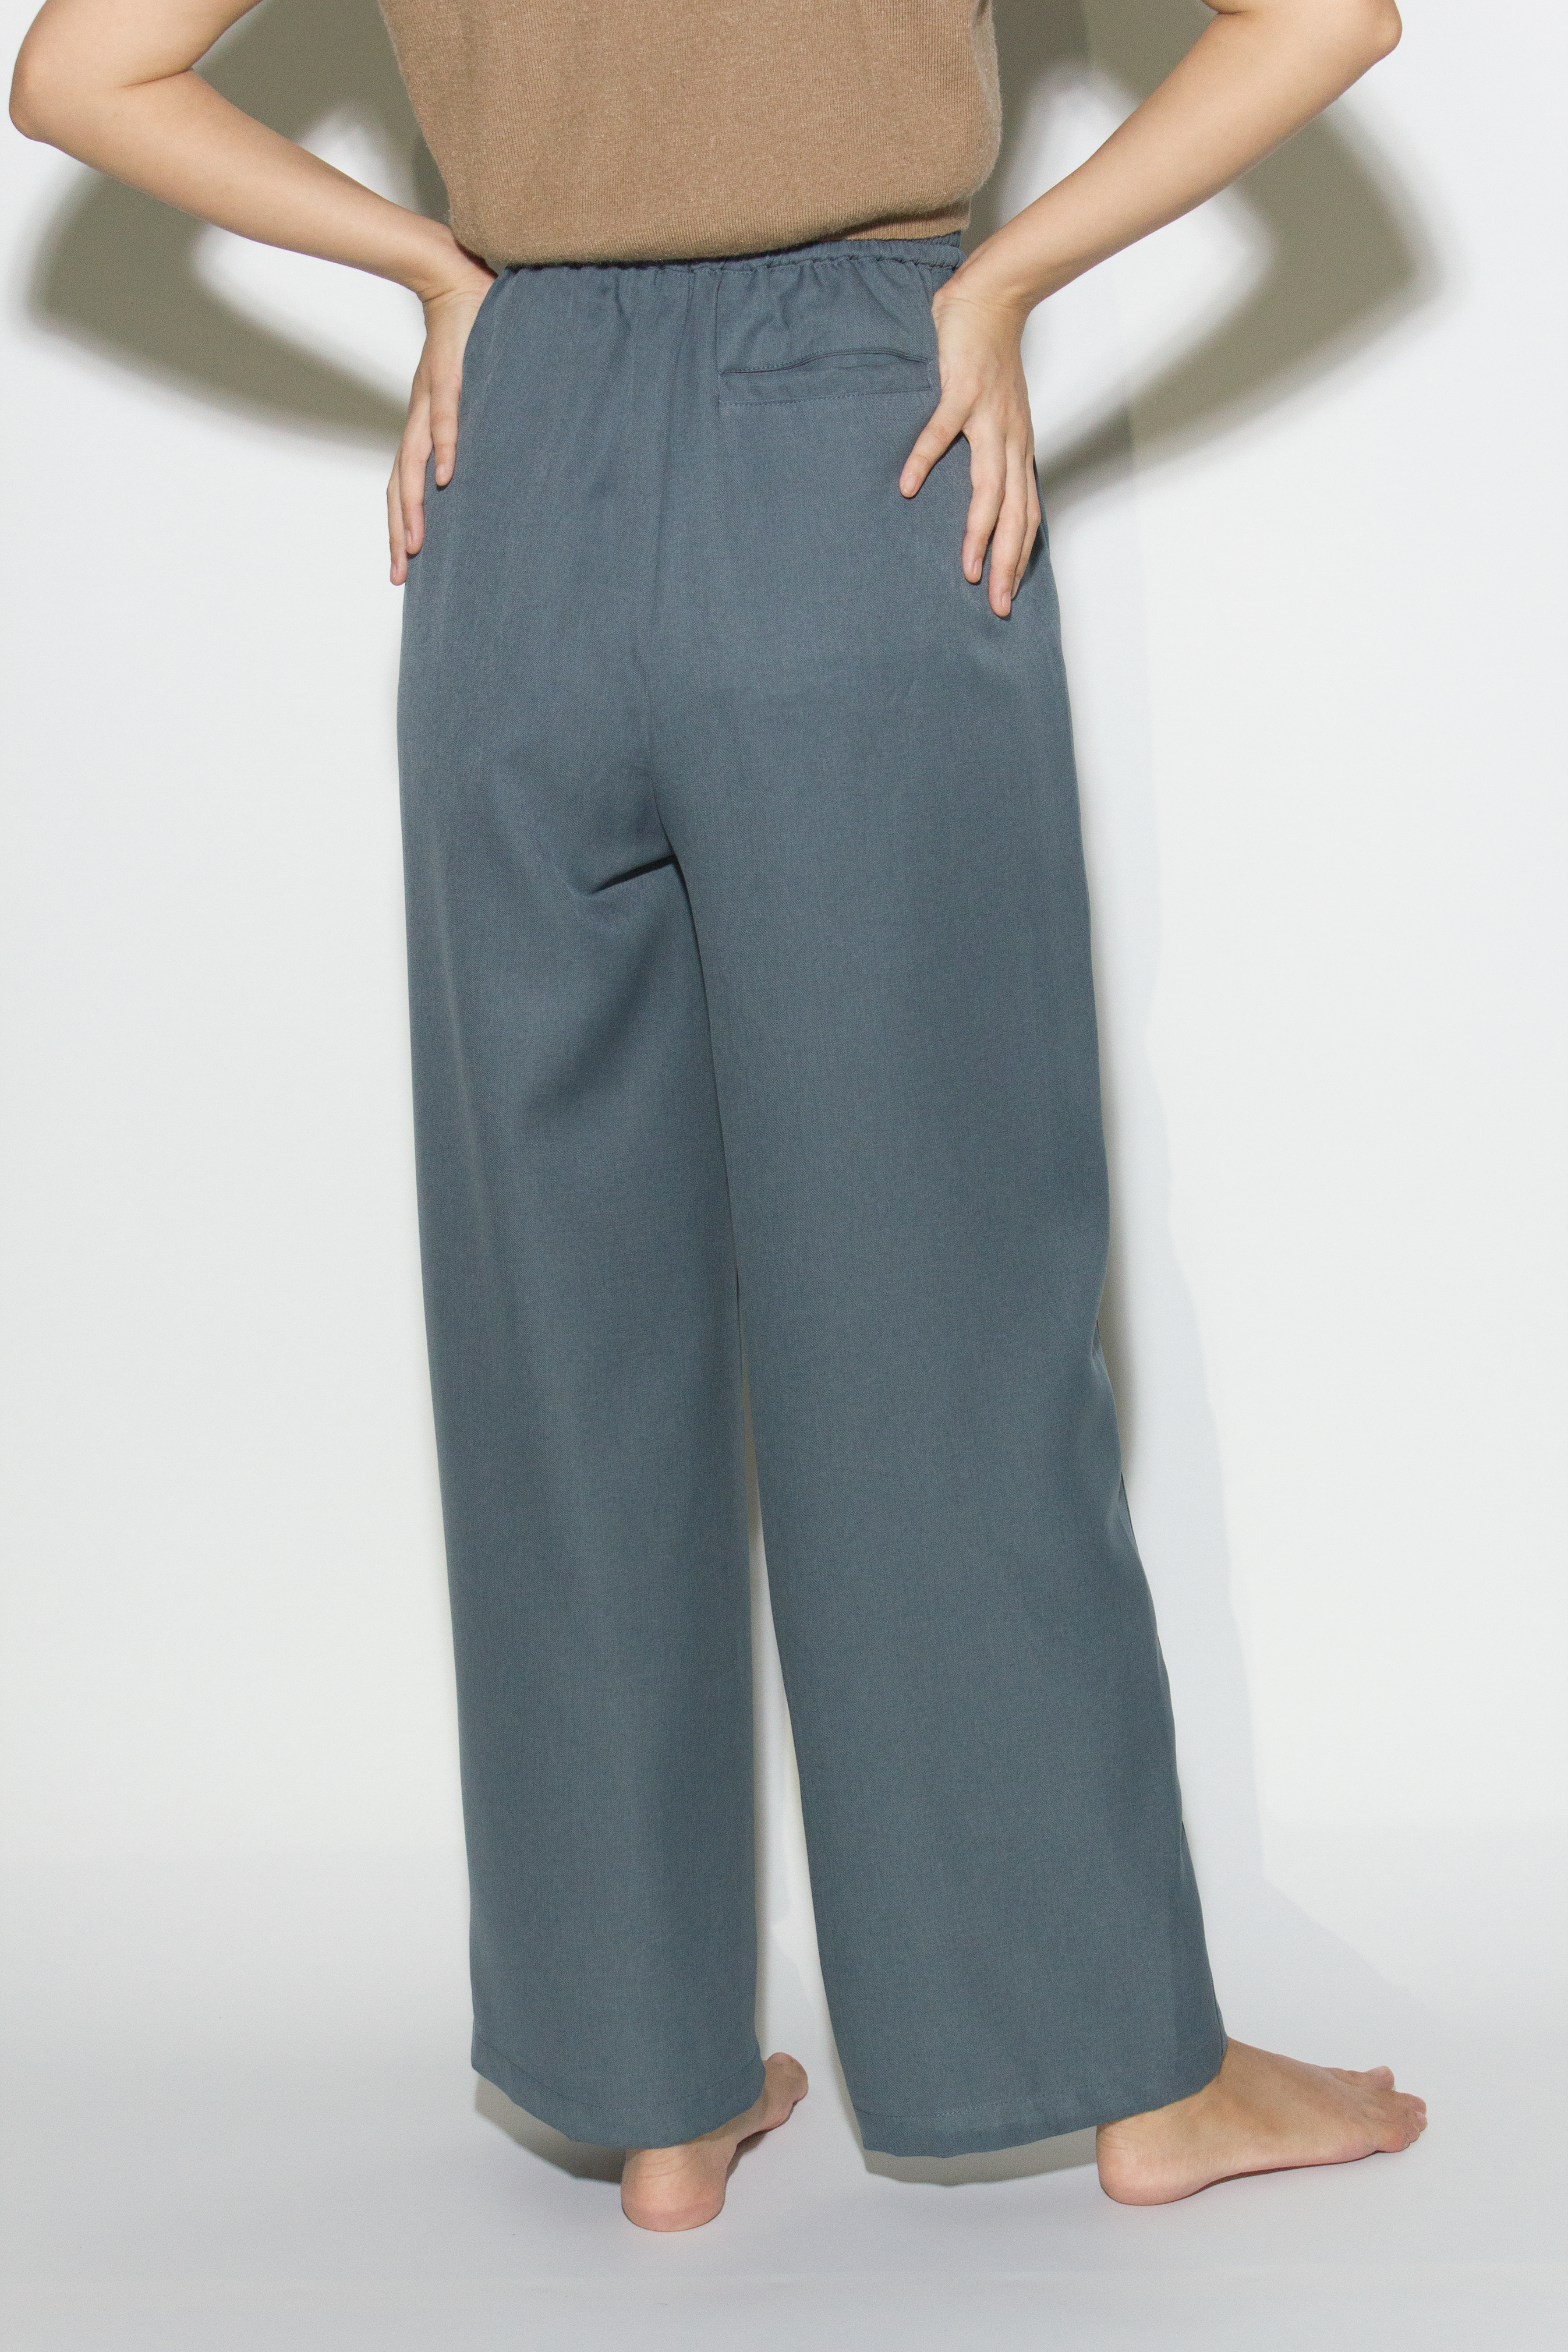 Twill Crease Pants in Stone Blue